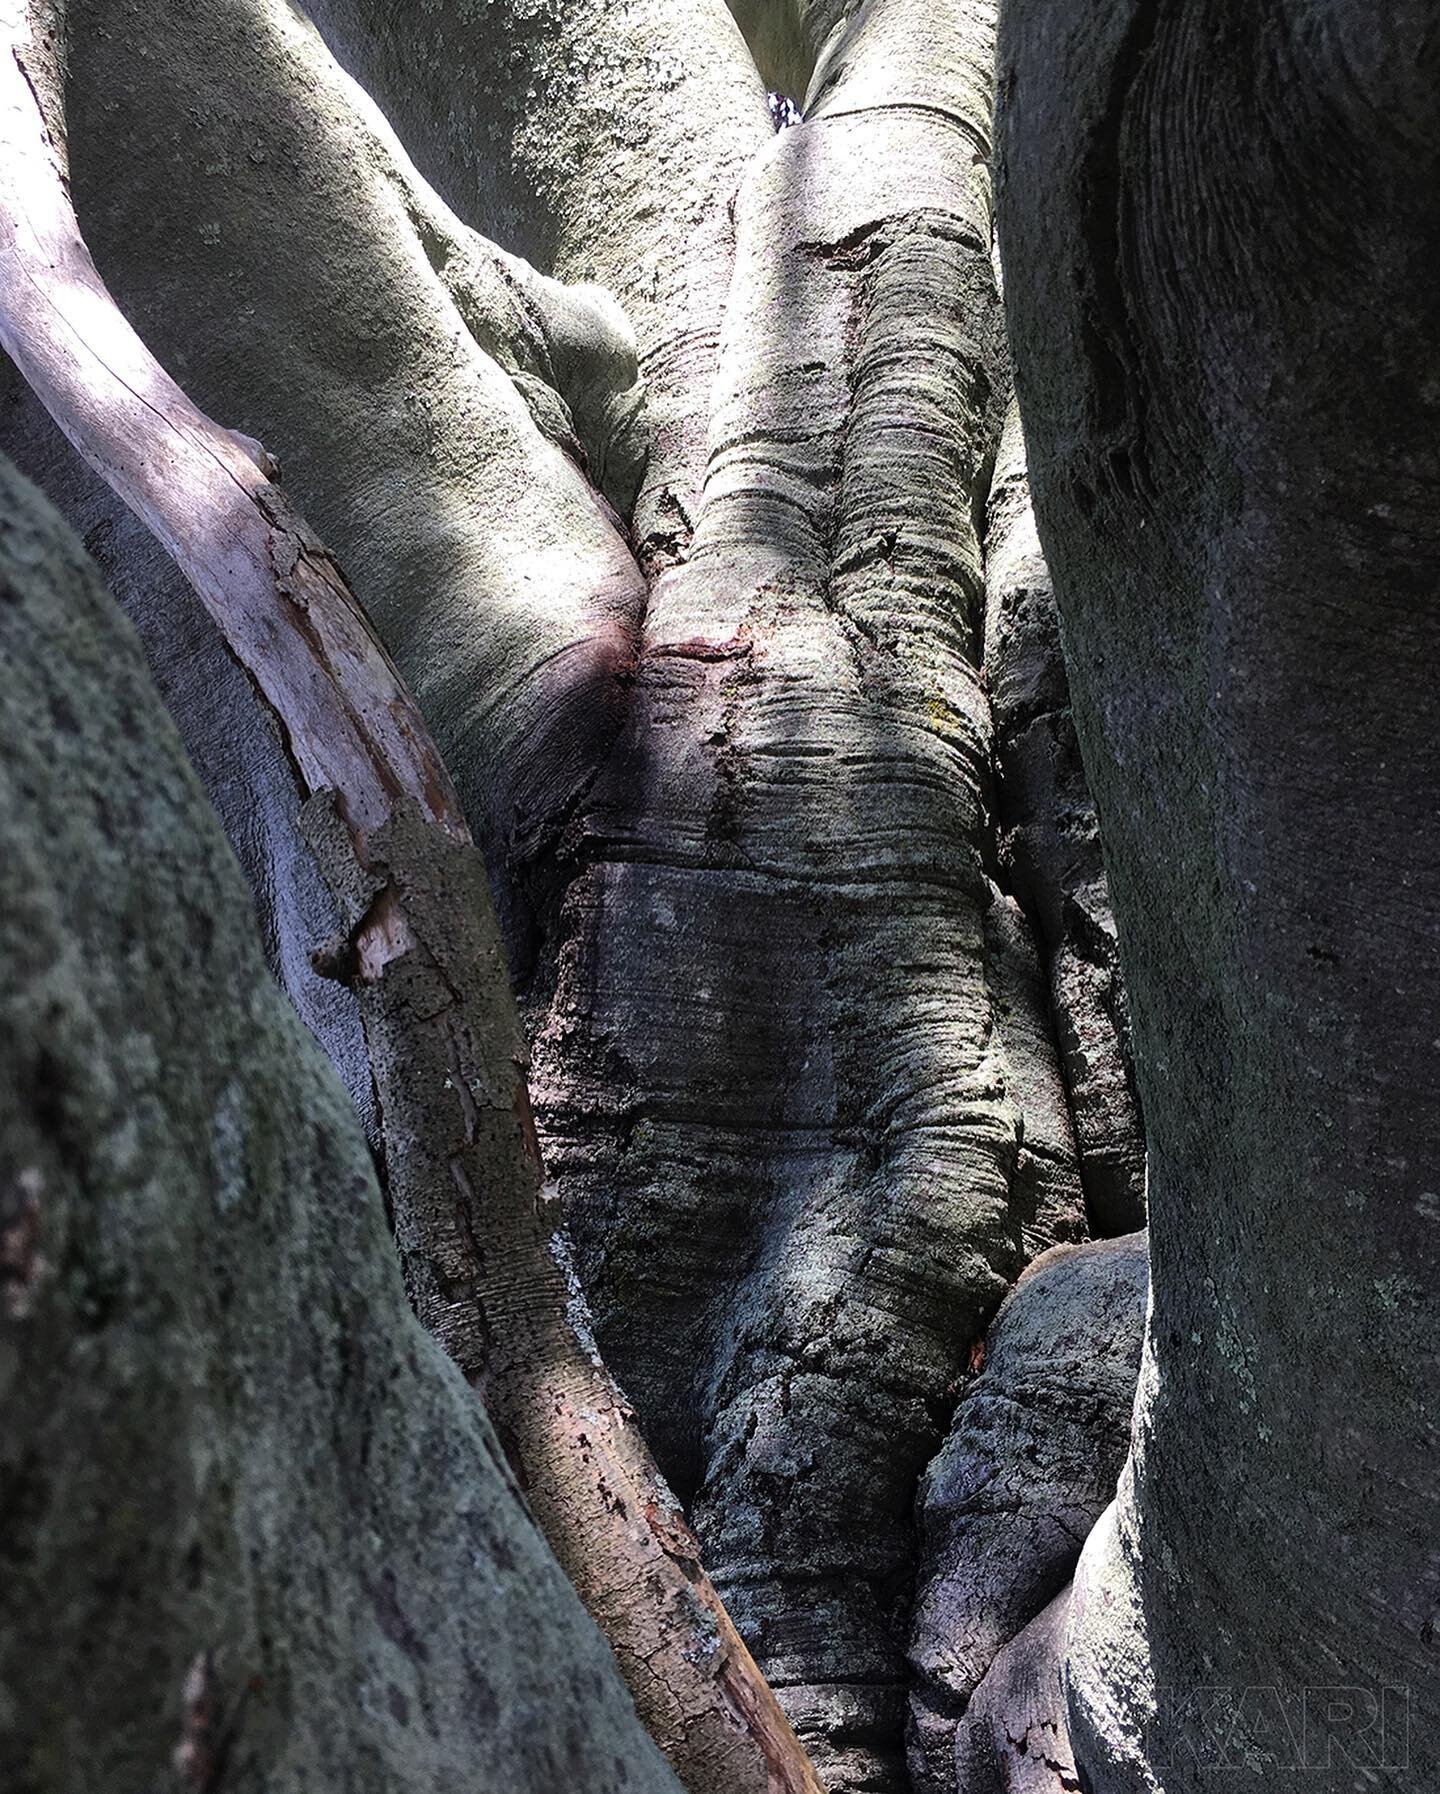 .
Nature surprises. First image evokes a worn desert rock face. Second image looks like the leg of a pachyderm. Third image reveals the tree.
Gnarled and twisted and beautiful - no idea what kind it is, but totally in love with it.
.
.
.
#mothernatur